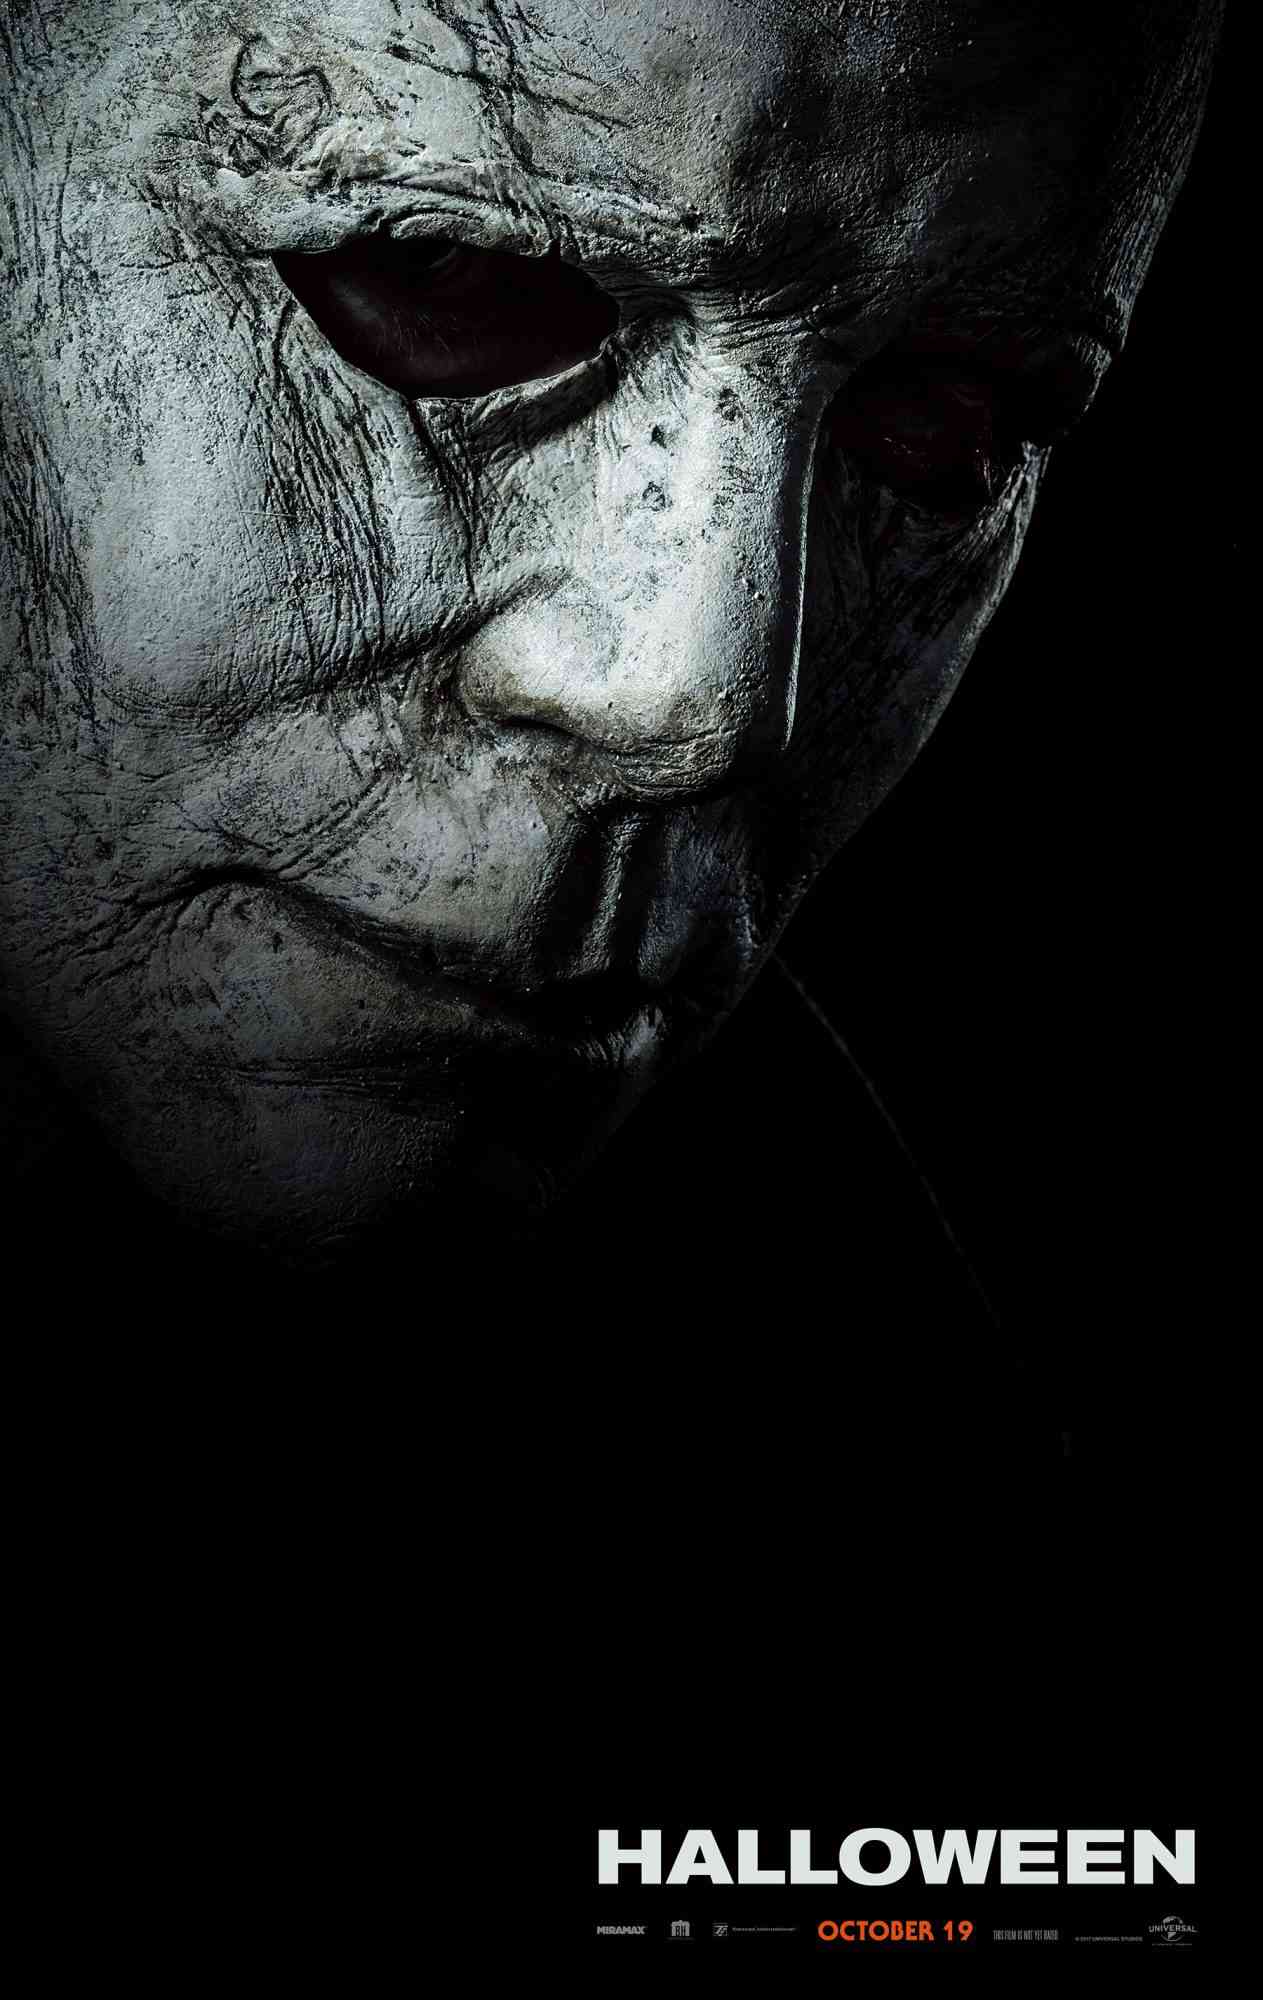 Halloween reboot: Michael Myers shows his face in first poster | EW.com